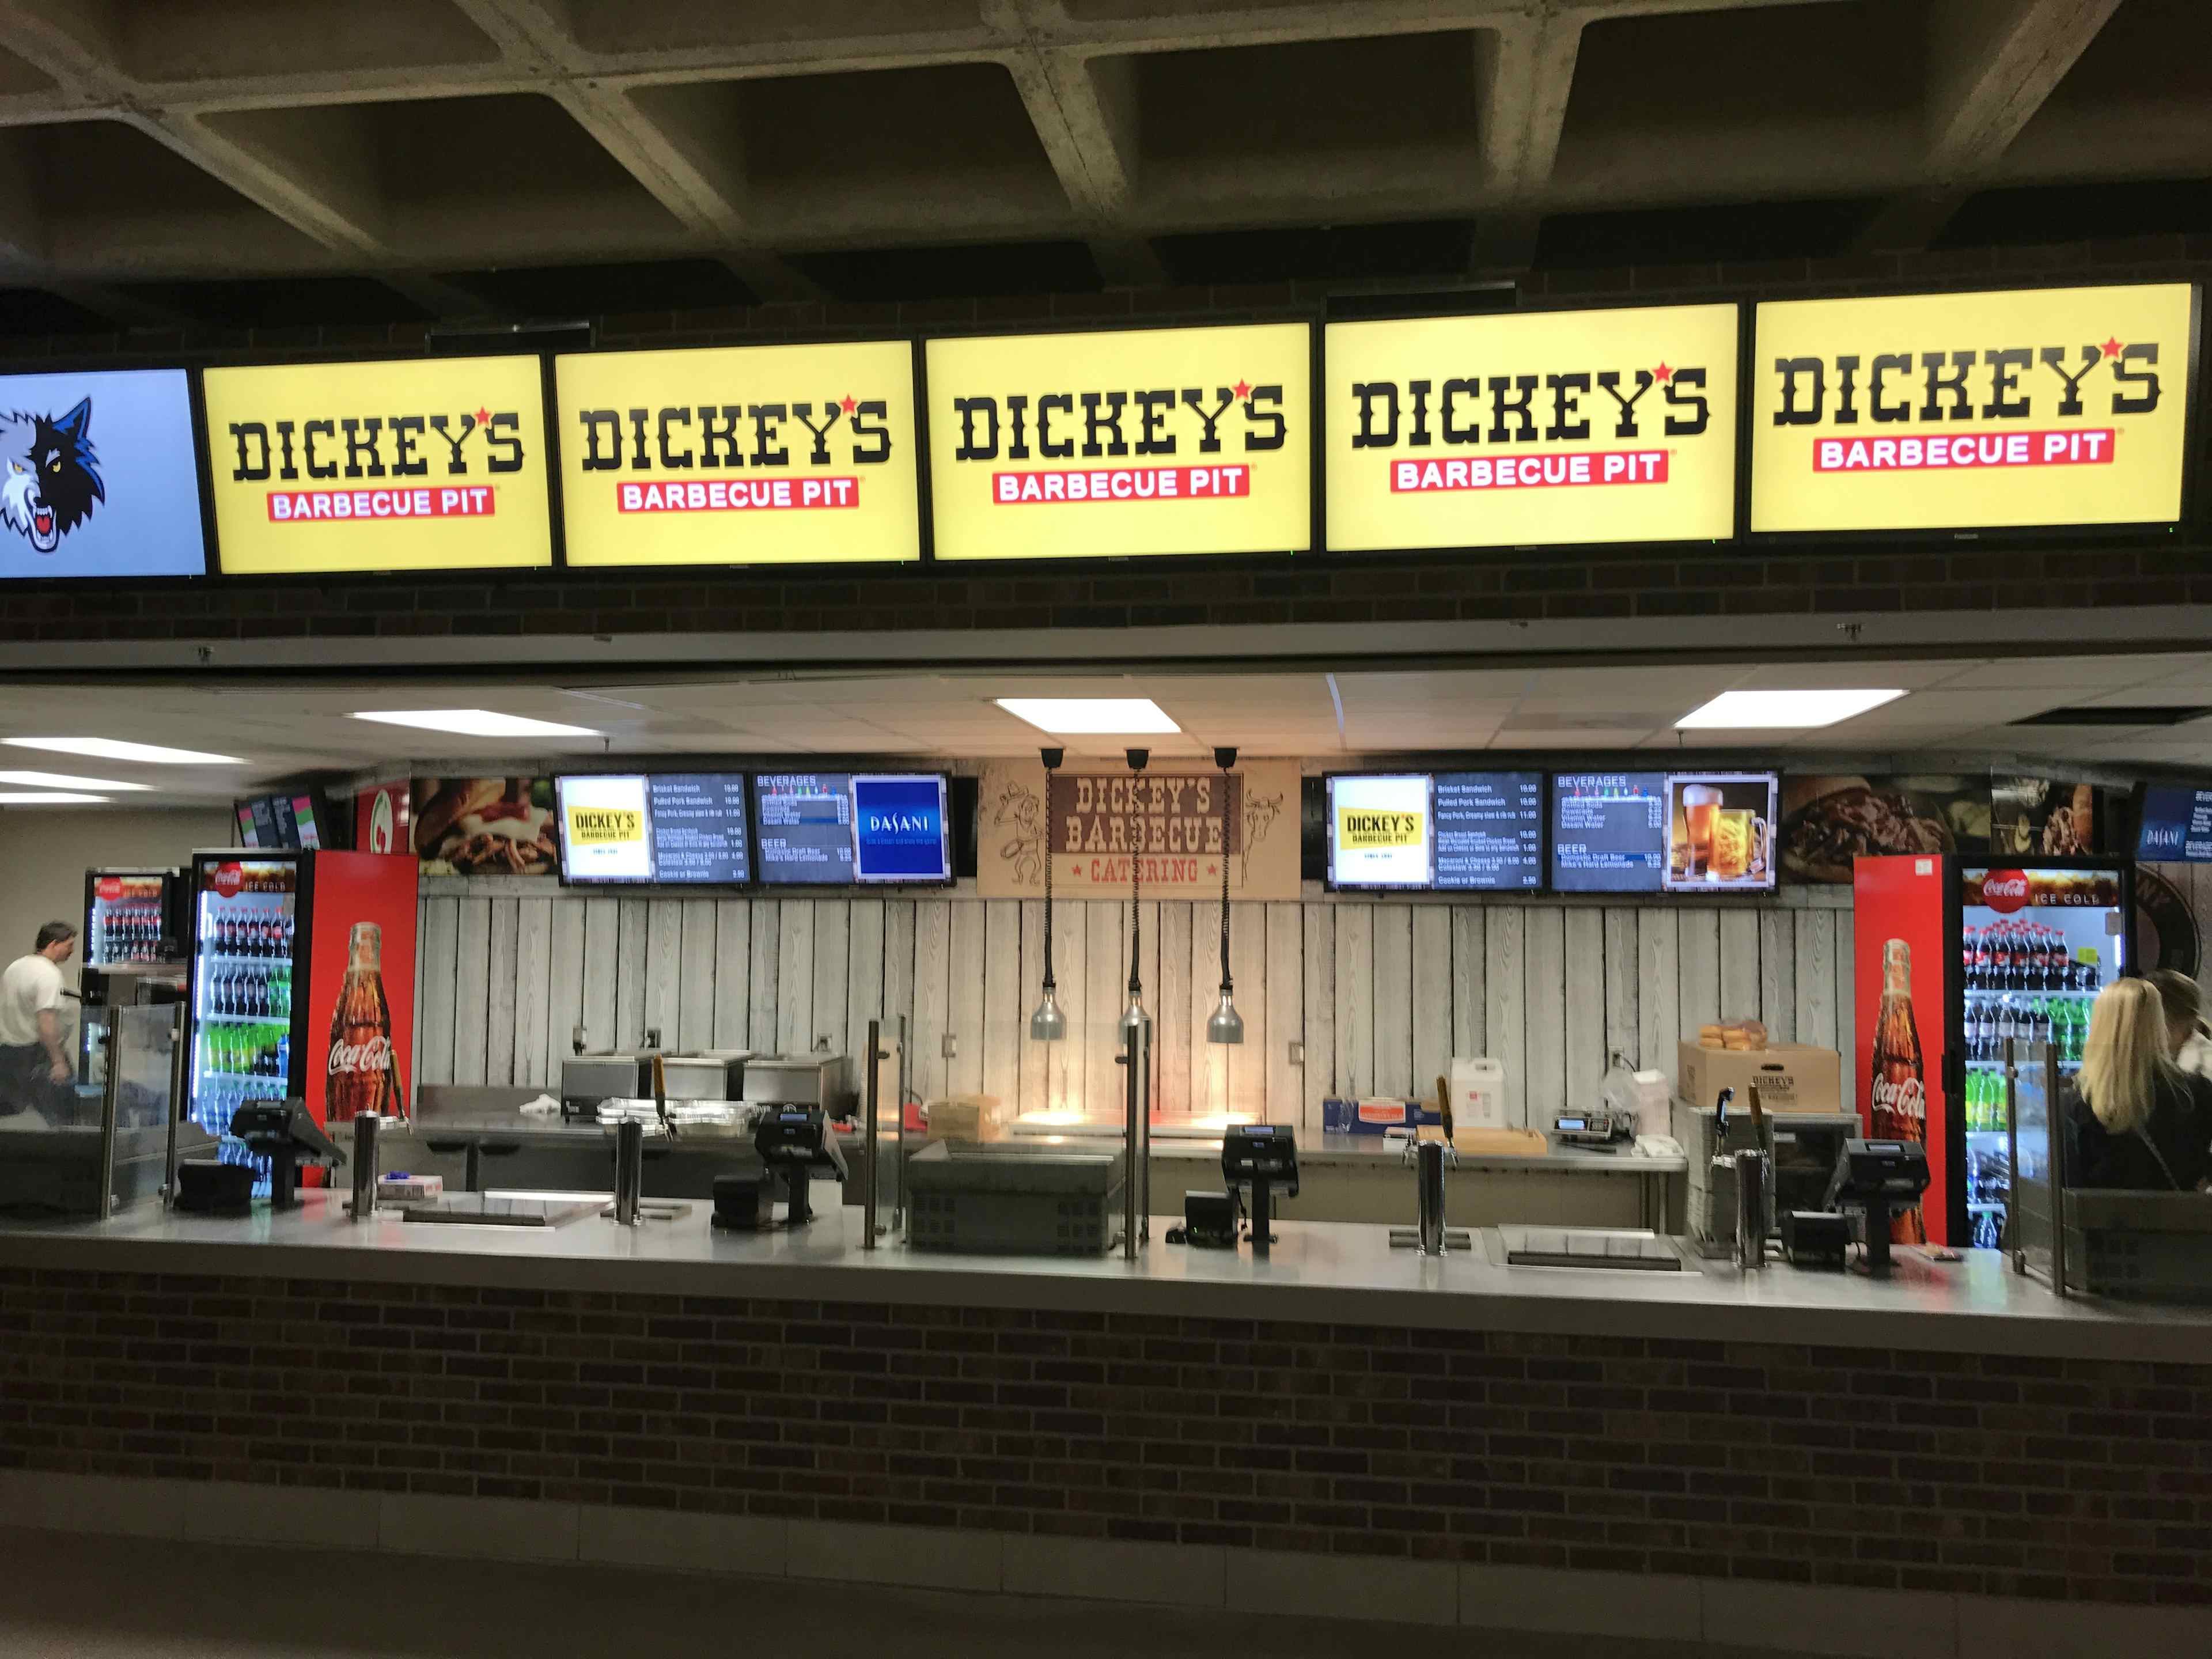 Dickey’s Barbecue Pit is the Newest Basketball Sensation